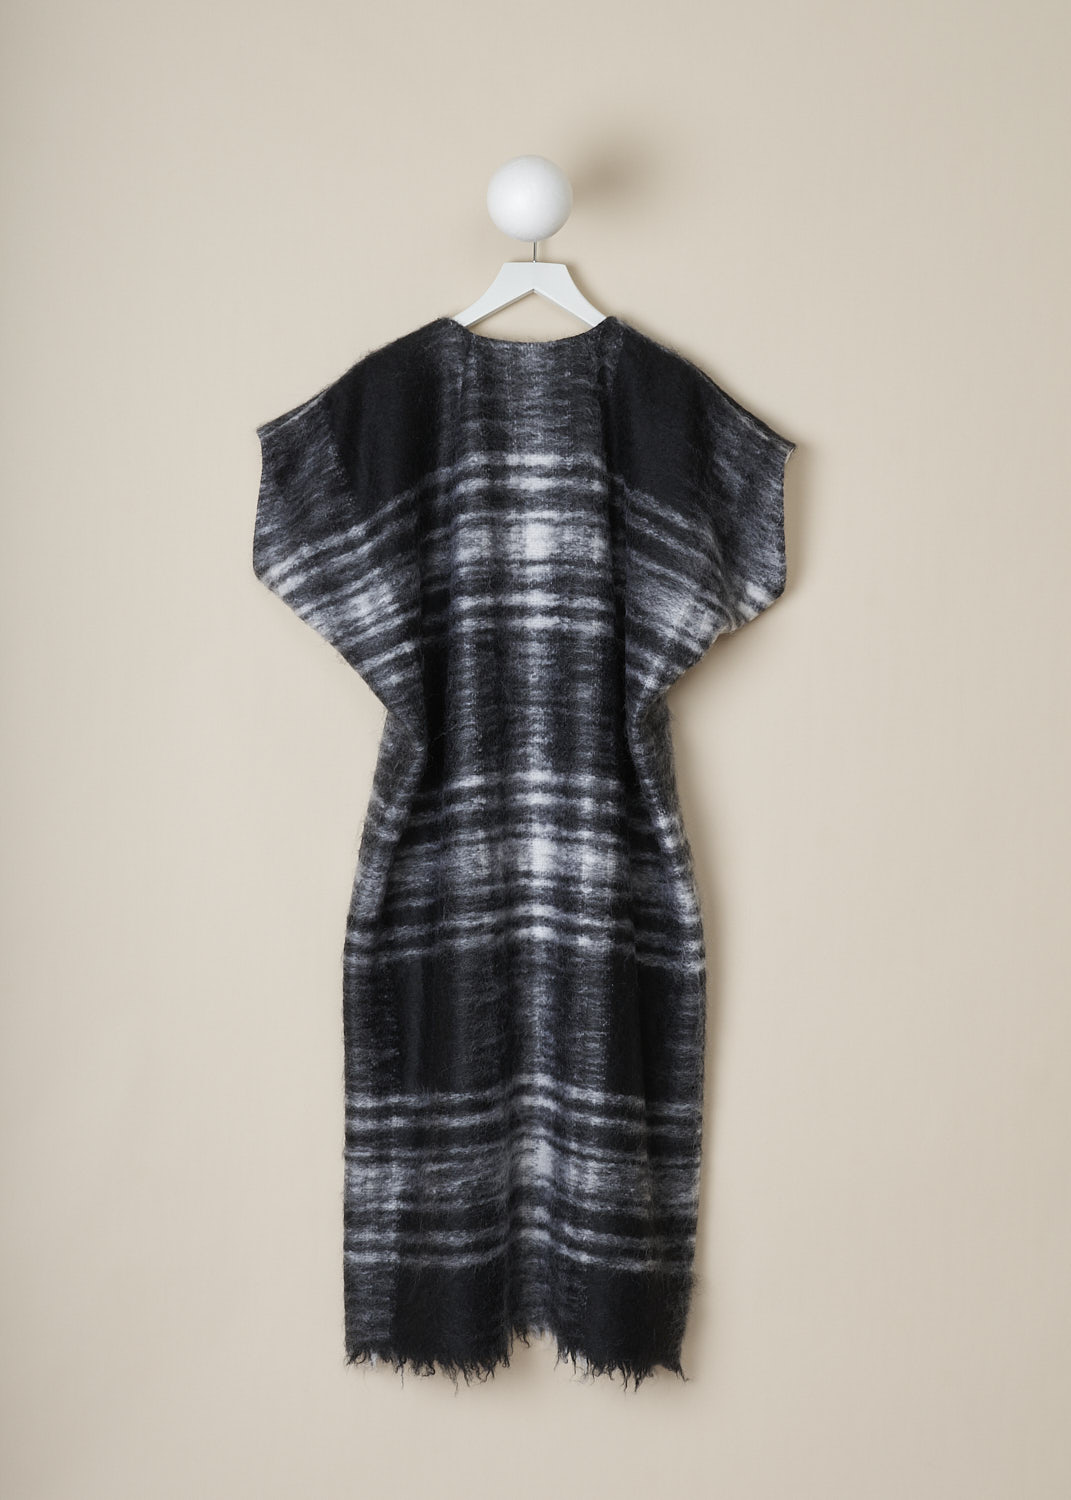 SOFIE Dâ€™HOORE, BLACK AND WHITE TARTAN DORIA DRESS, DORIA_WOMO_BLACK_TARTAN, Black, White, Print, Back, This black and white tartan Doria maxi dress has a round neckline with a concealed zip closure on the left shoulder. The dress has short cap sleeves. In the front, the dress has on-seam slanted pockets. The dress has a straight, raw edged hemline. The dress is fully lined. 
